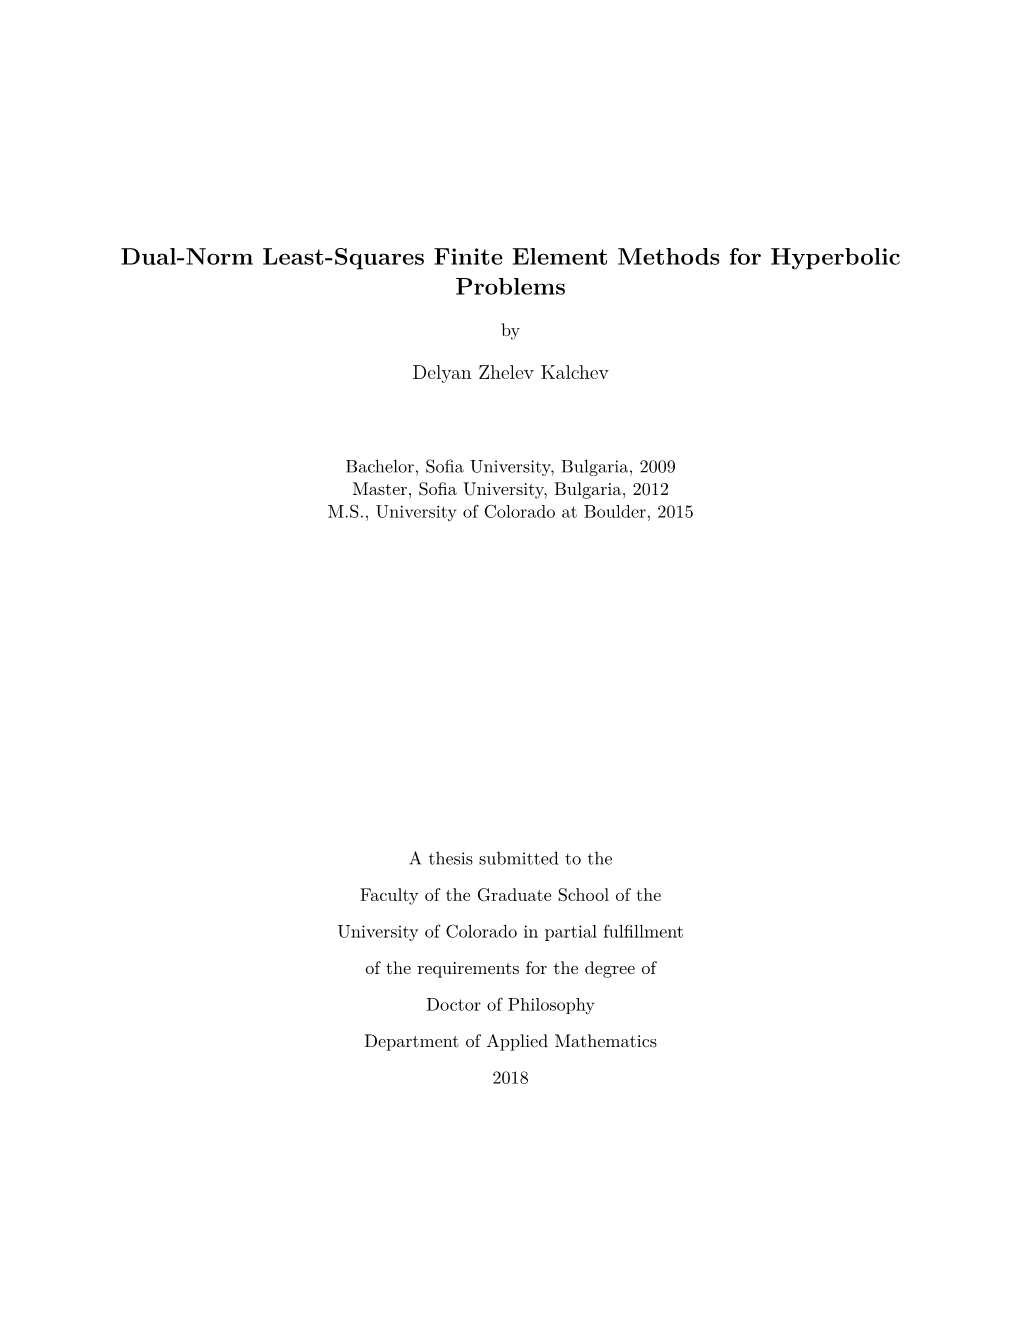 Dual-Norm Least-Squares Finite Element Methods for Hyperbolic Problems